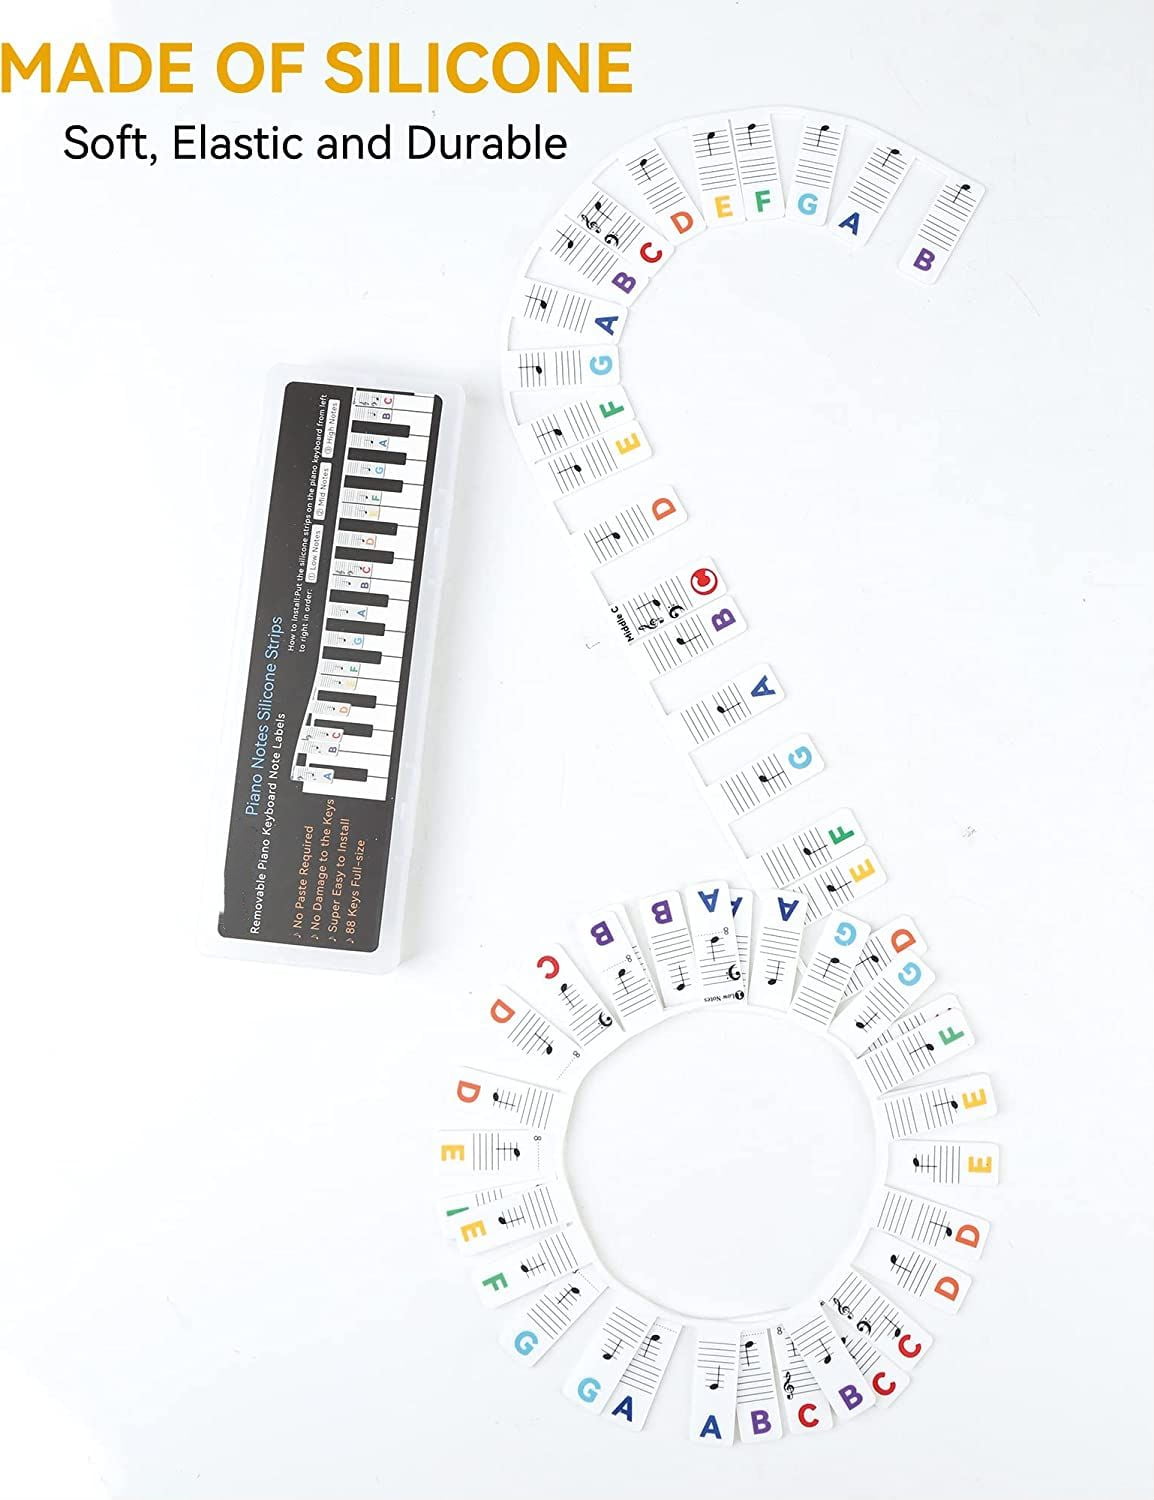 Piano Notes Guide for Beginner, Removable Piano Keyboard Note Labels for  Learning, 88-Key Full Size, Made of Silicone, No Need Stickers, Reusable  and